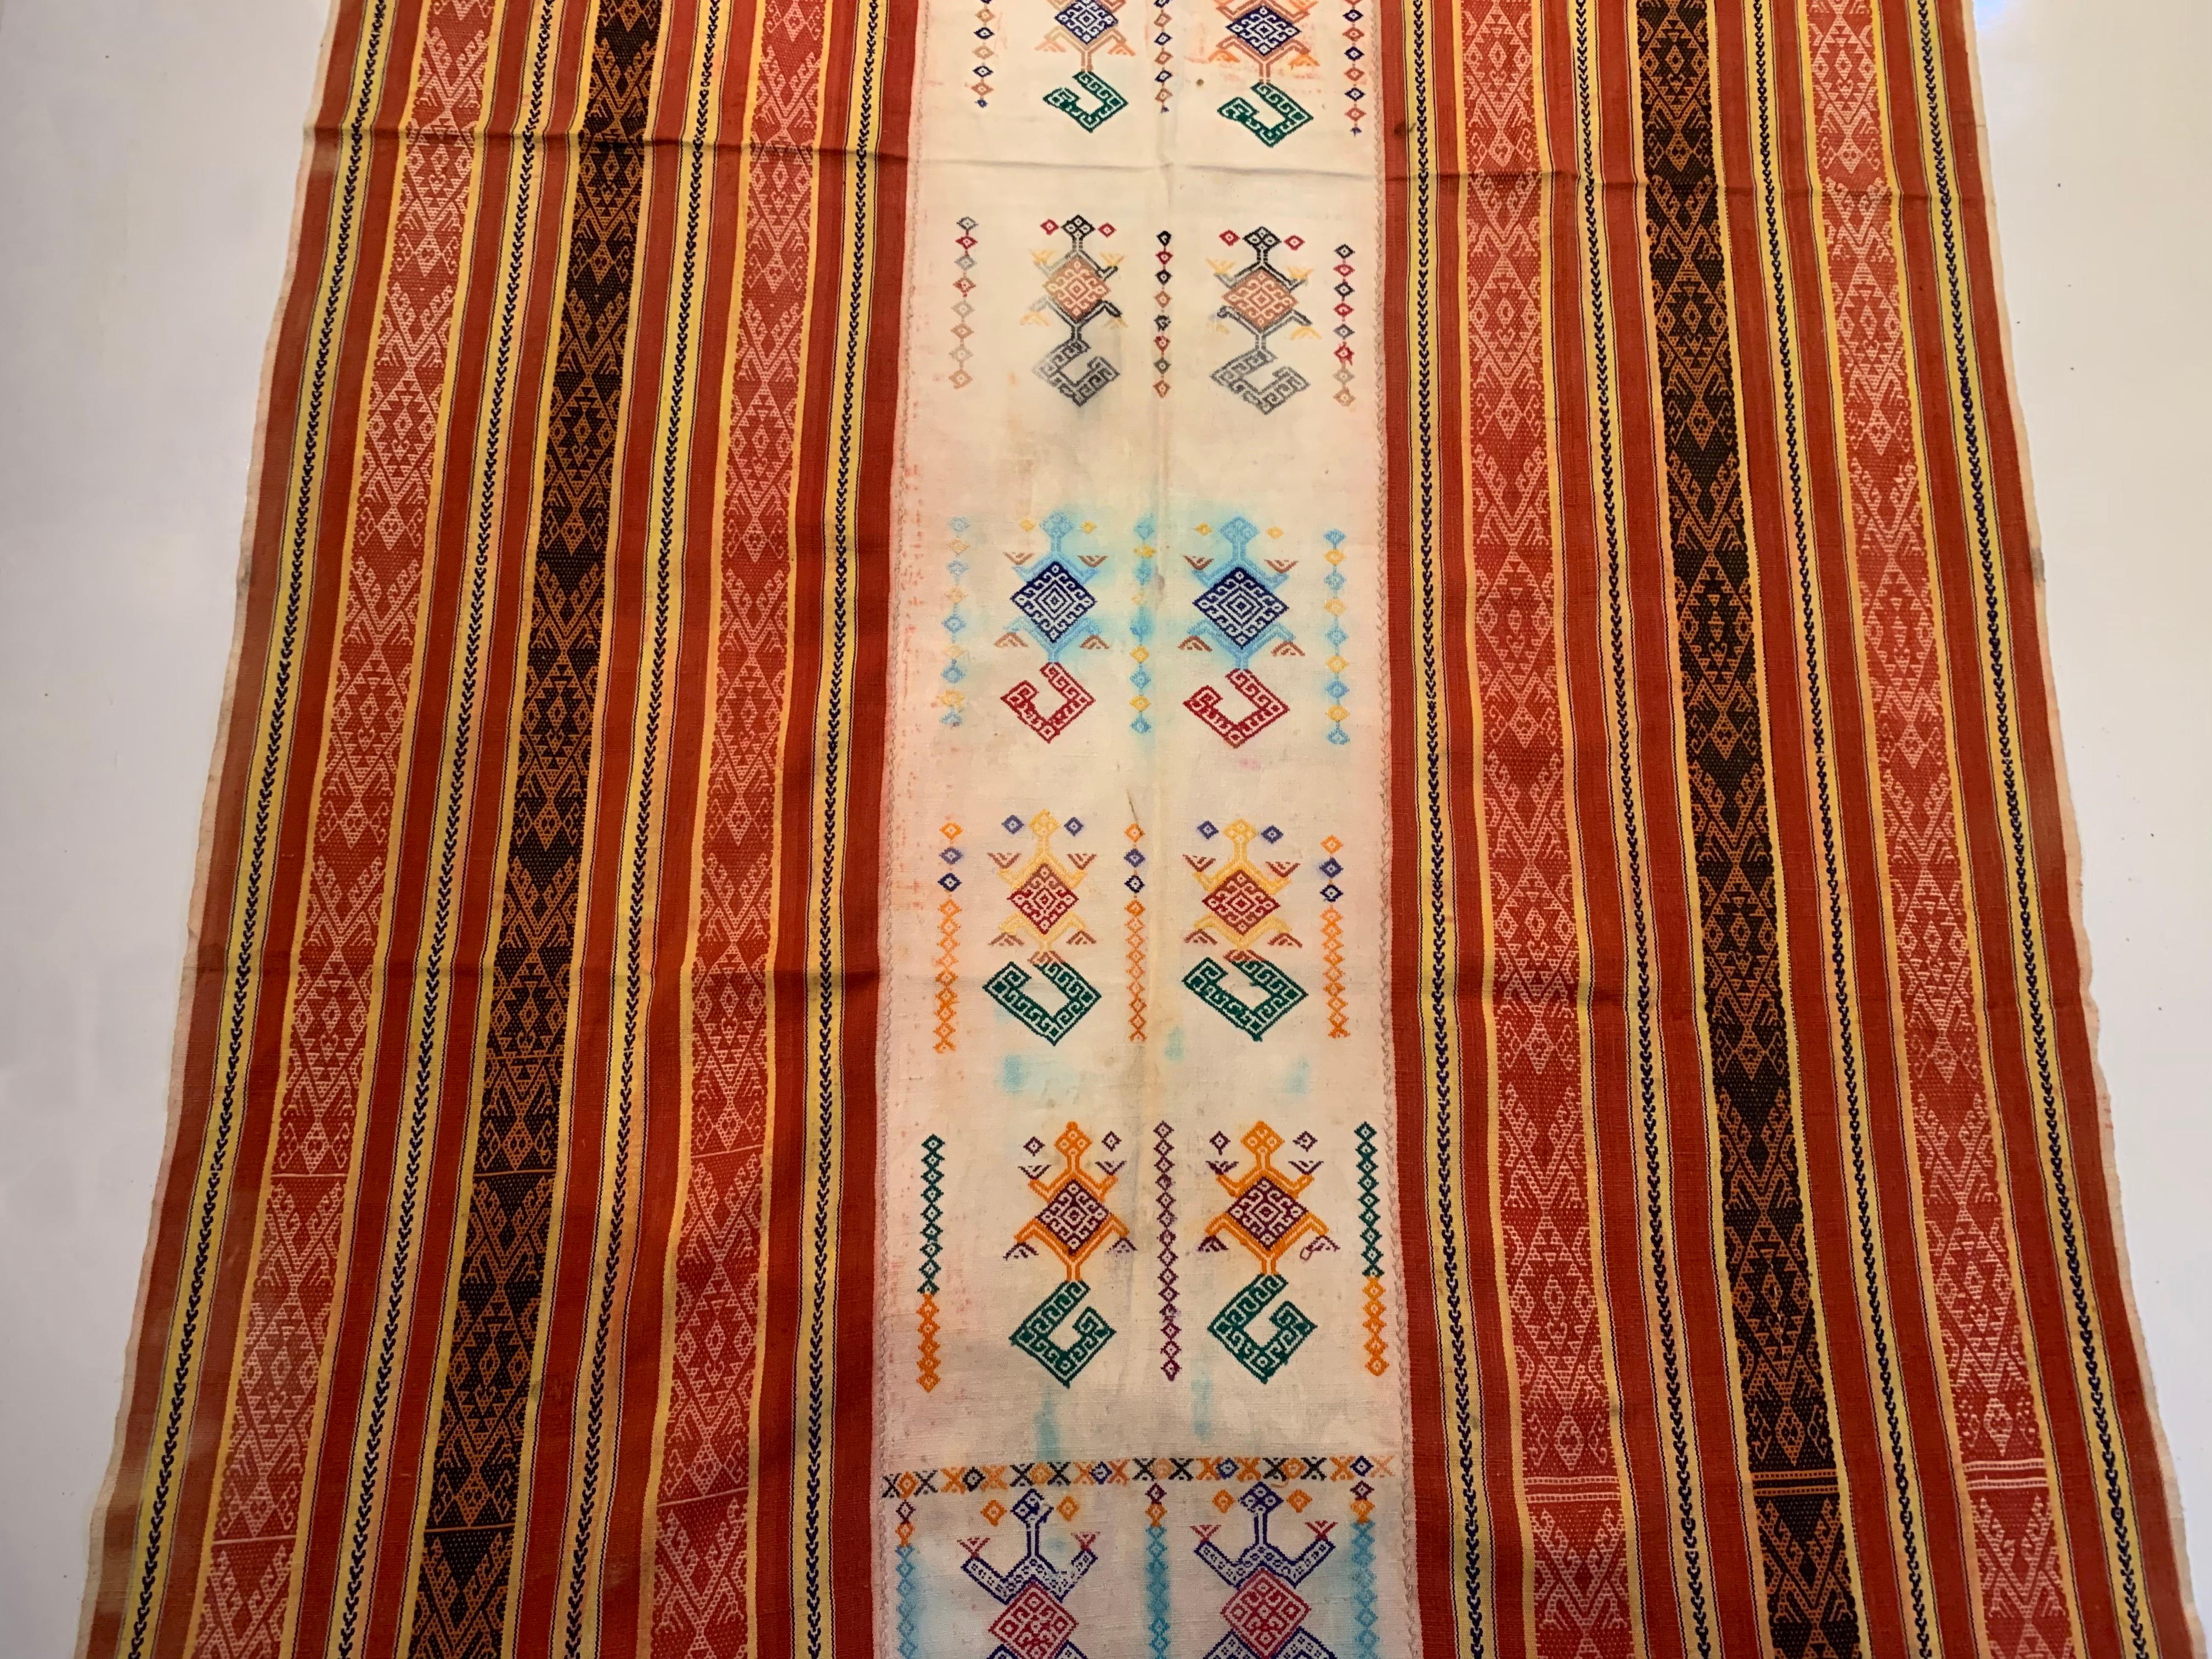 Ikat Textile from Timor Stunning Tribal Motifs & Colors, Indonesia c. 1950 For Sale 2